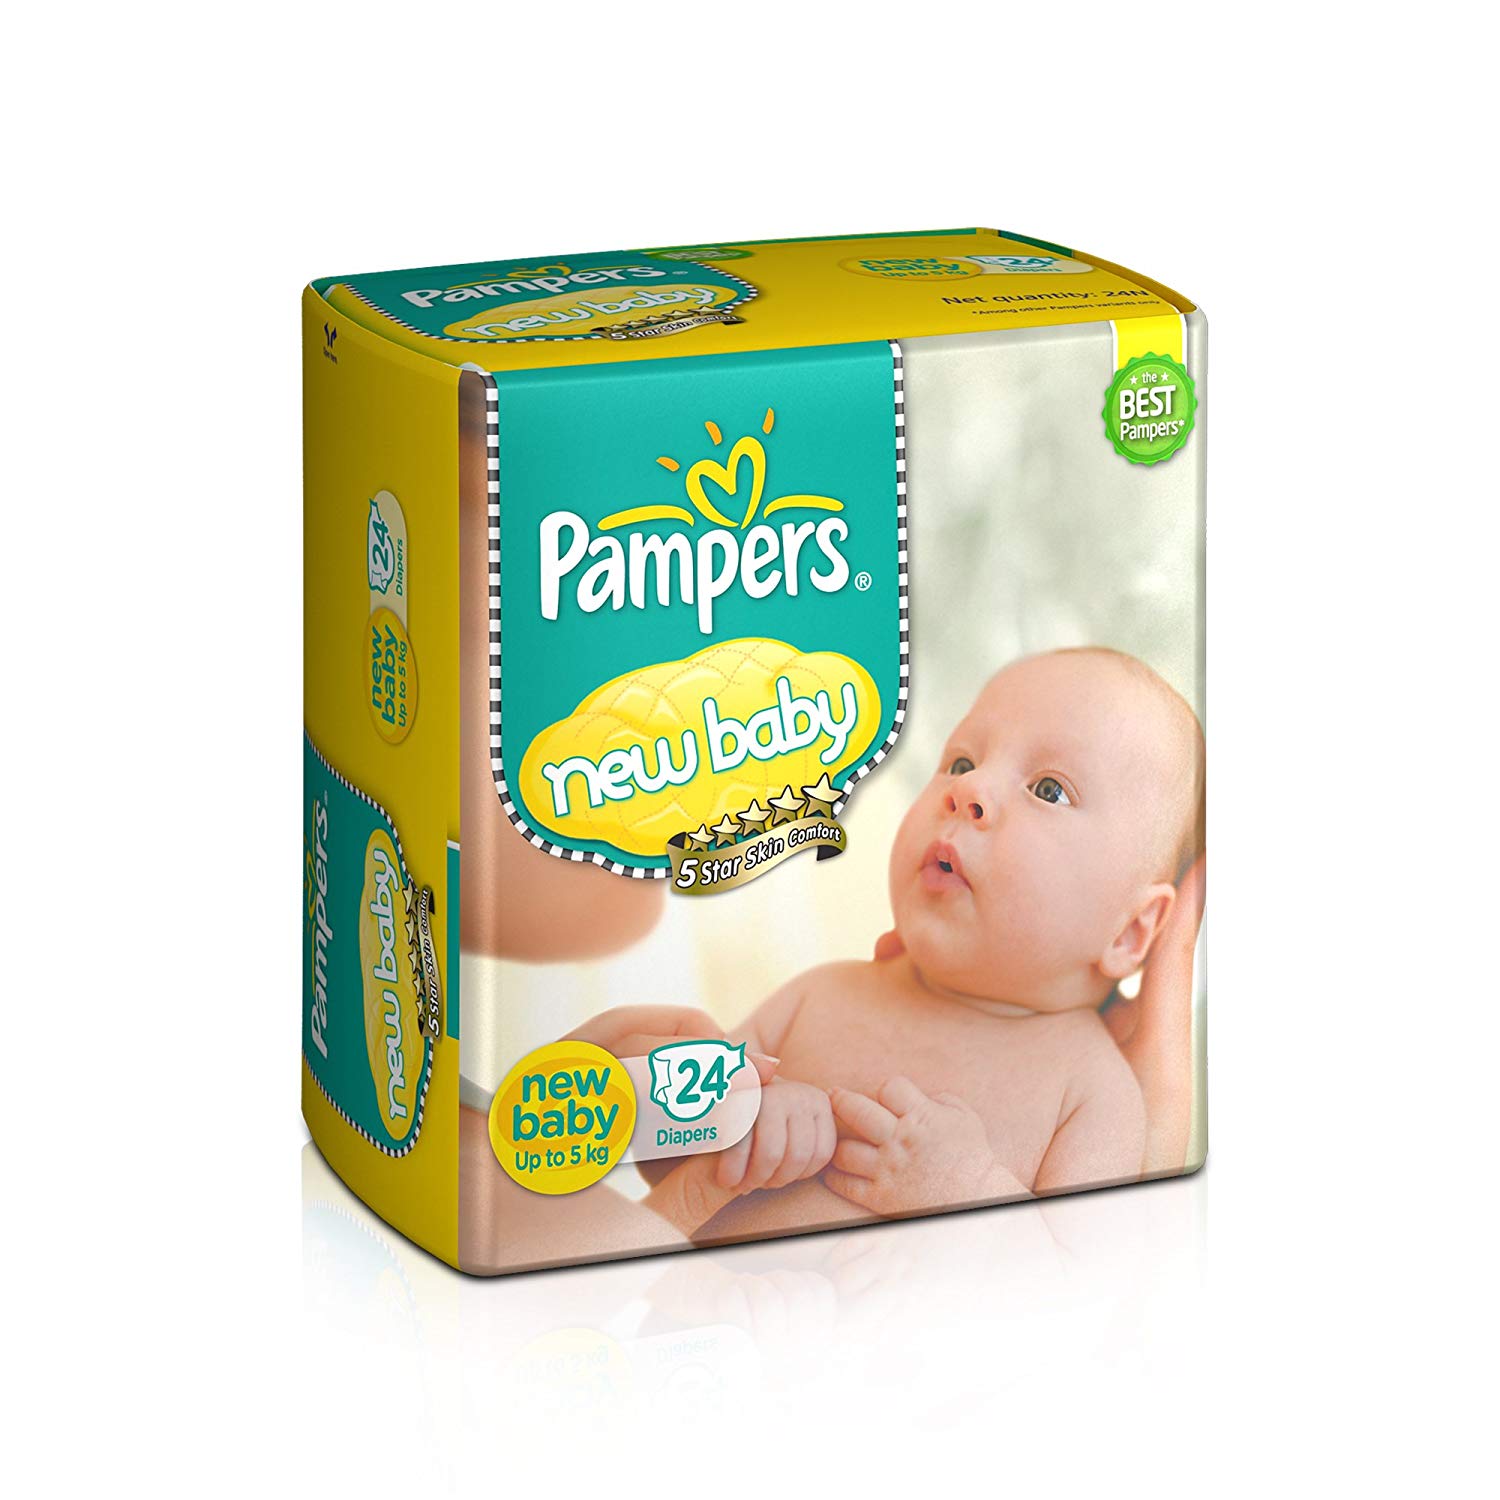 born baby diapers